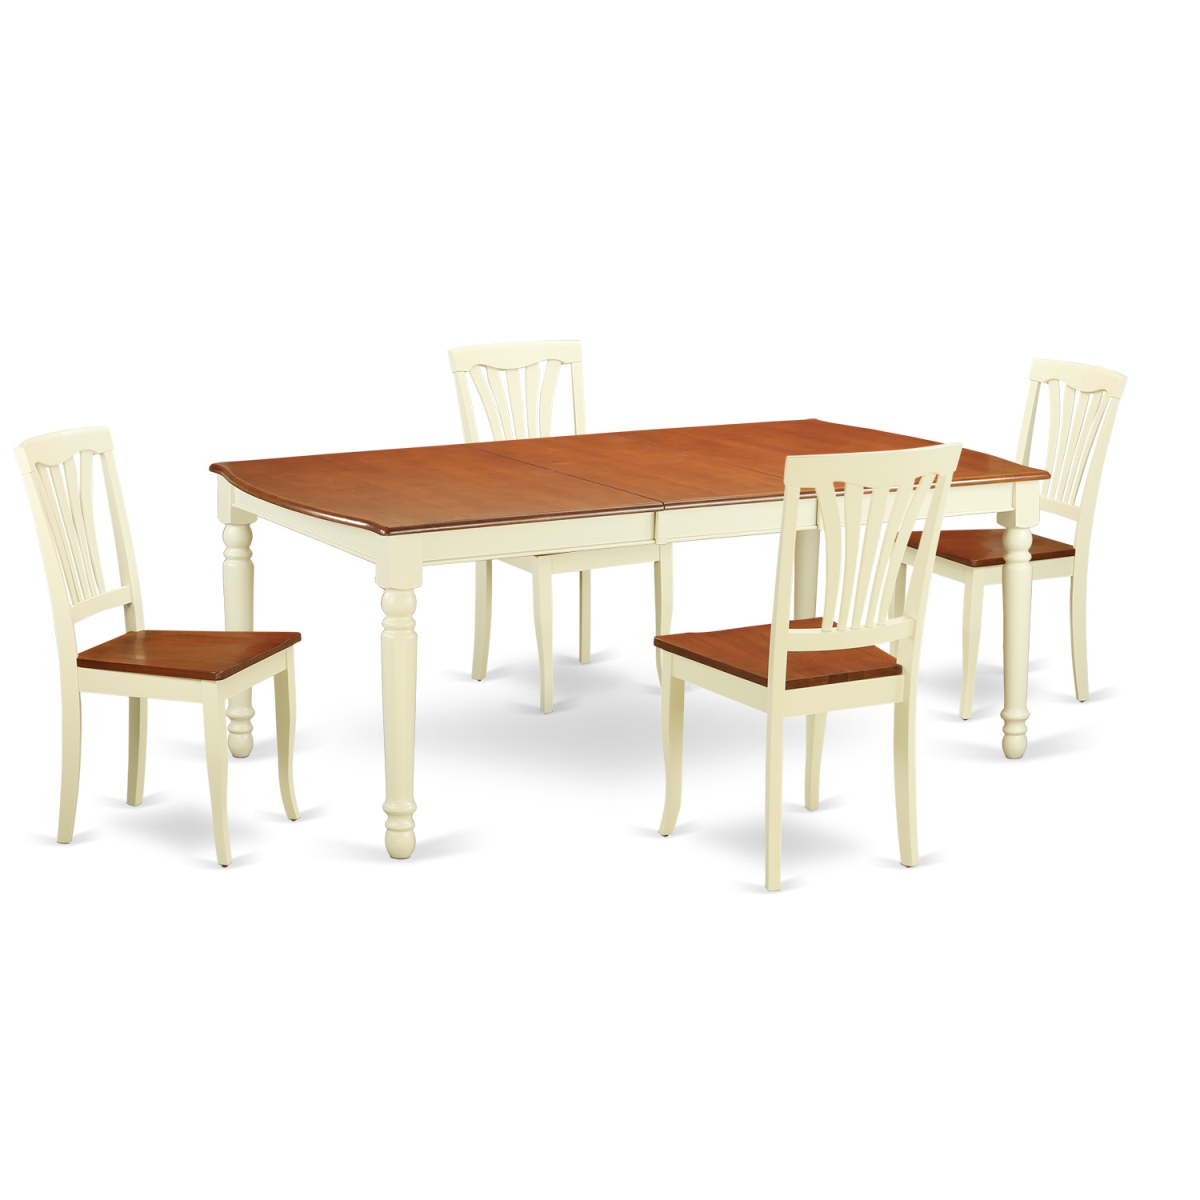 Doav5-whi-w Wood Seat Dinette Table Set - Kitchen Table & 4 Chairs, Buttermilk & Cherry - 5 Piece